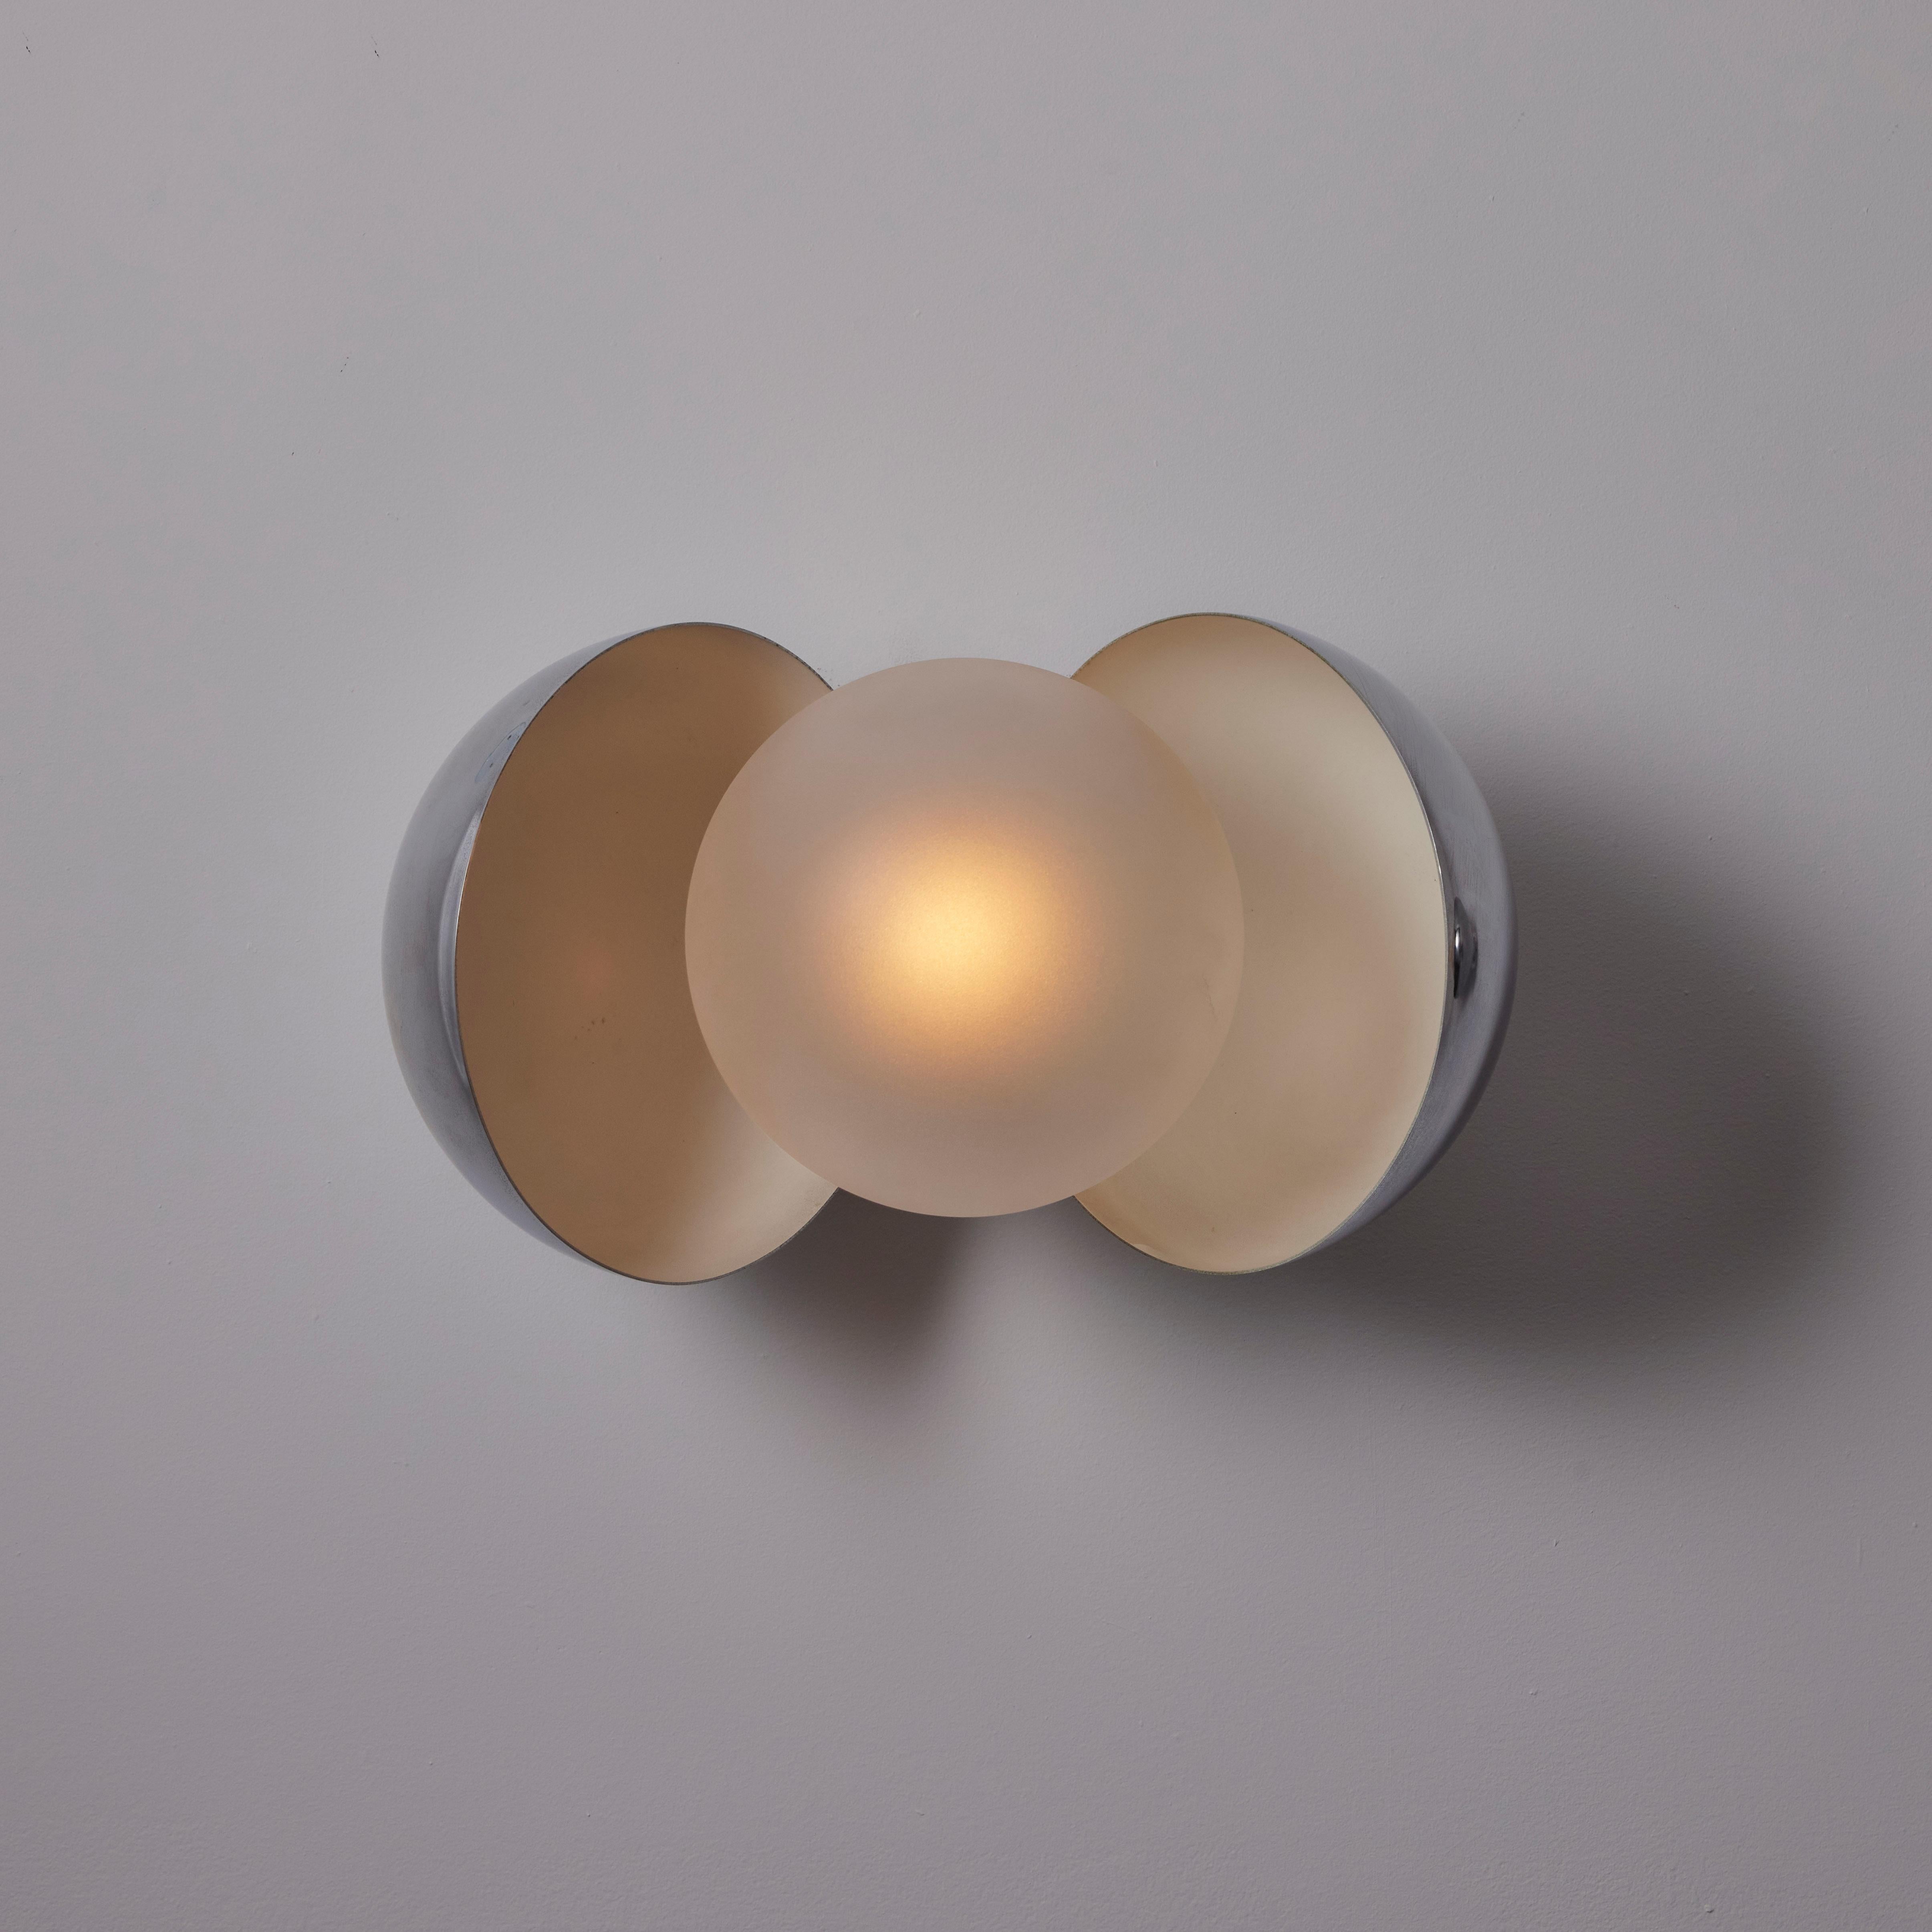 Frosted Rare Pair of Diaframma Sconces by G. Piero & A. Monti for Fontana Arte 